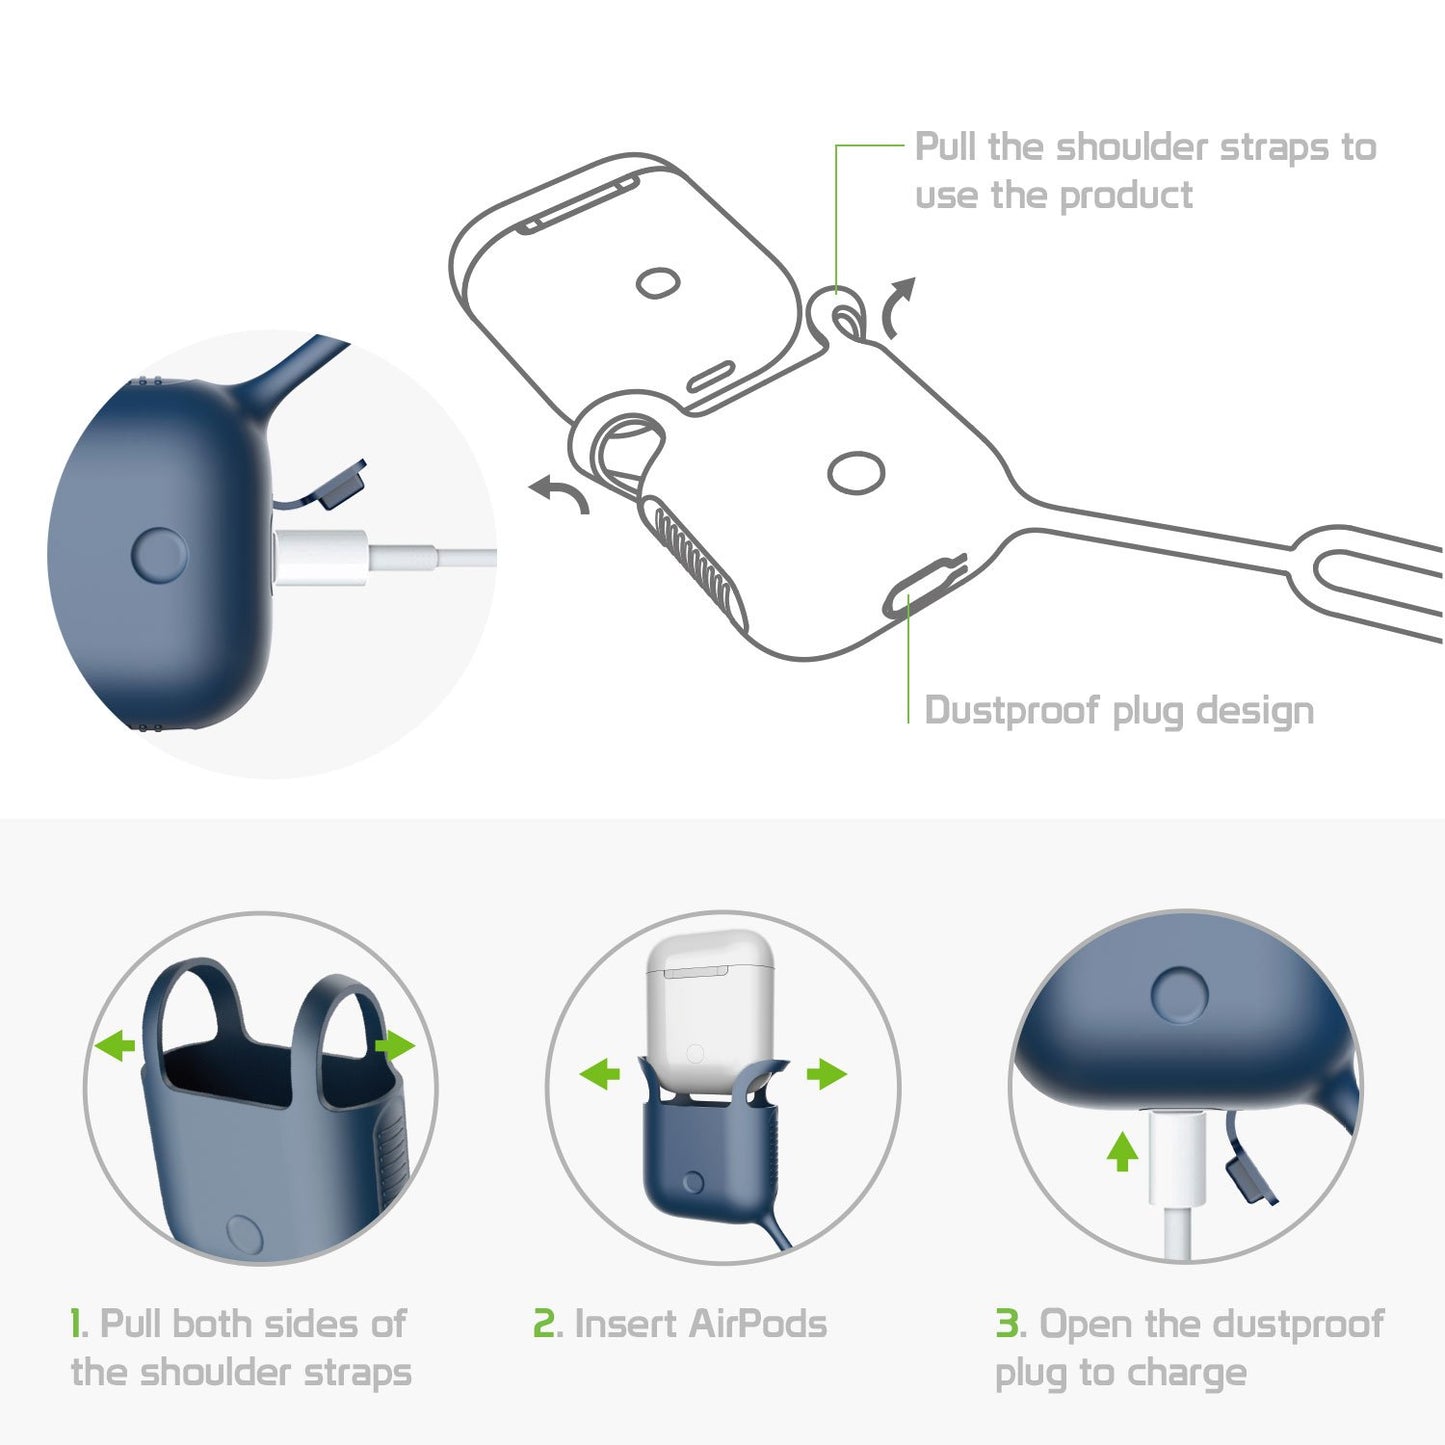 SCPODBL - AirPods Case, Protective Silicone Case Cover for AirPods (AirPods Strap Included) by Cellet - Blue